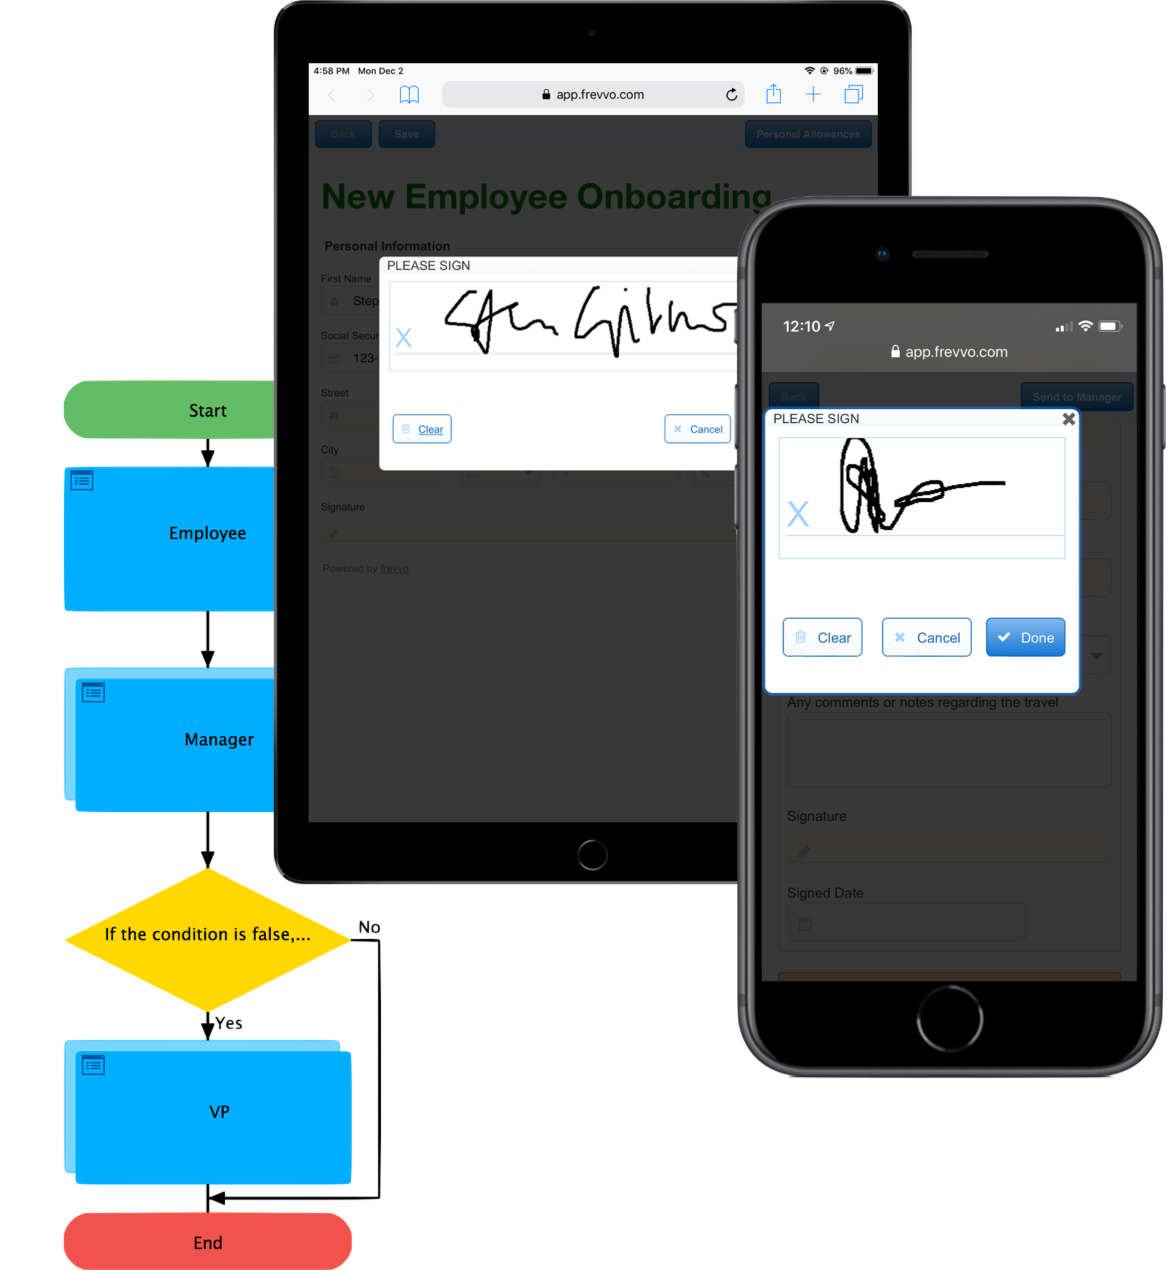 Digital signatures on mobile devices